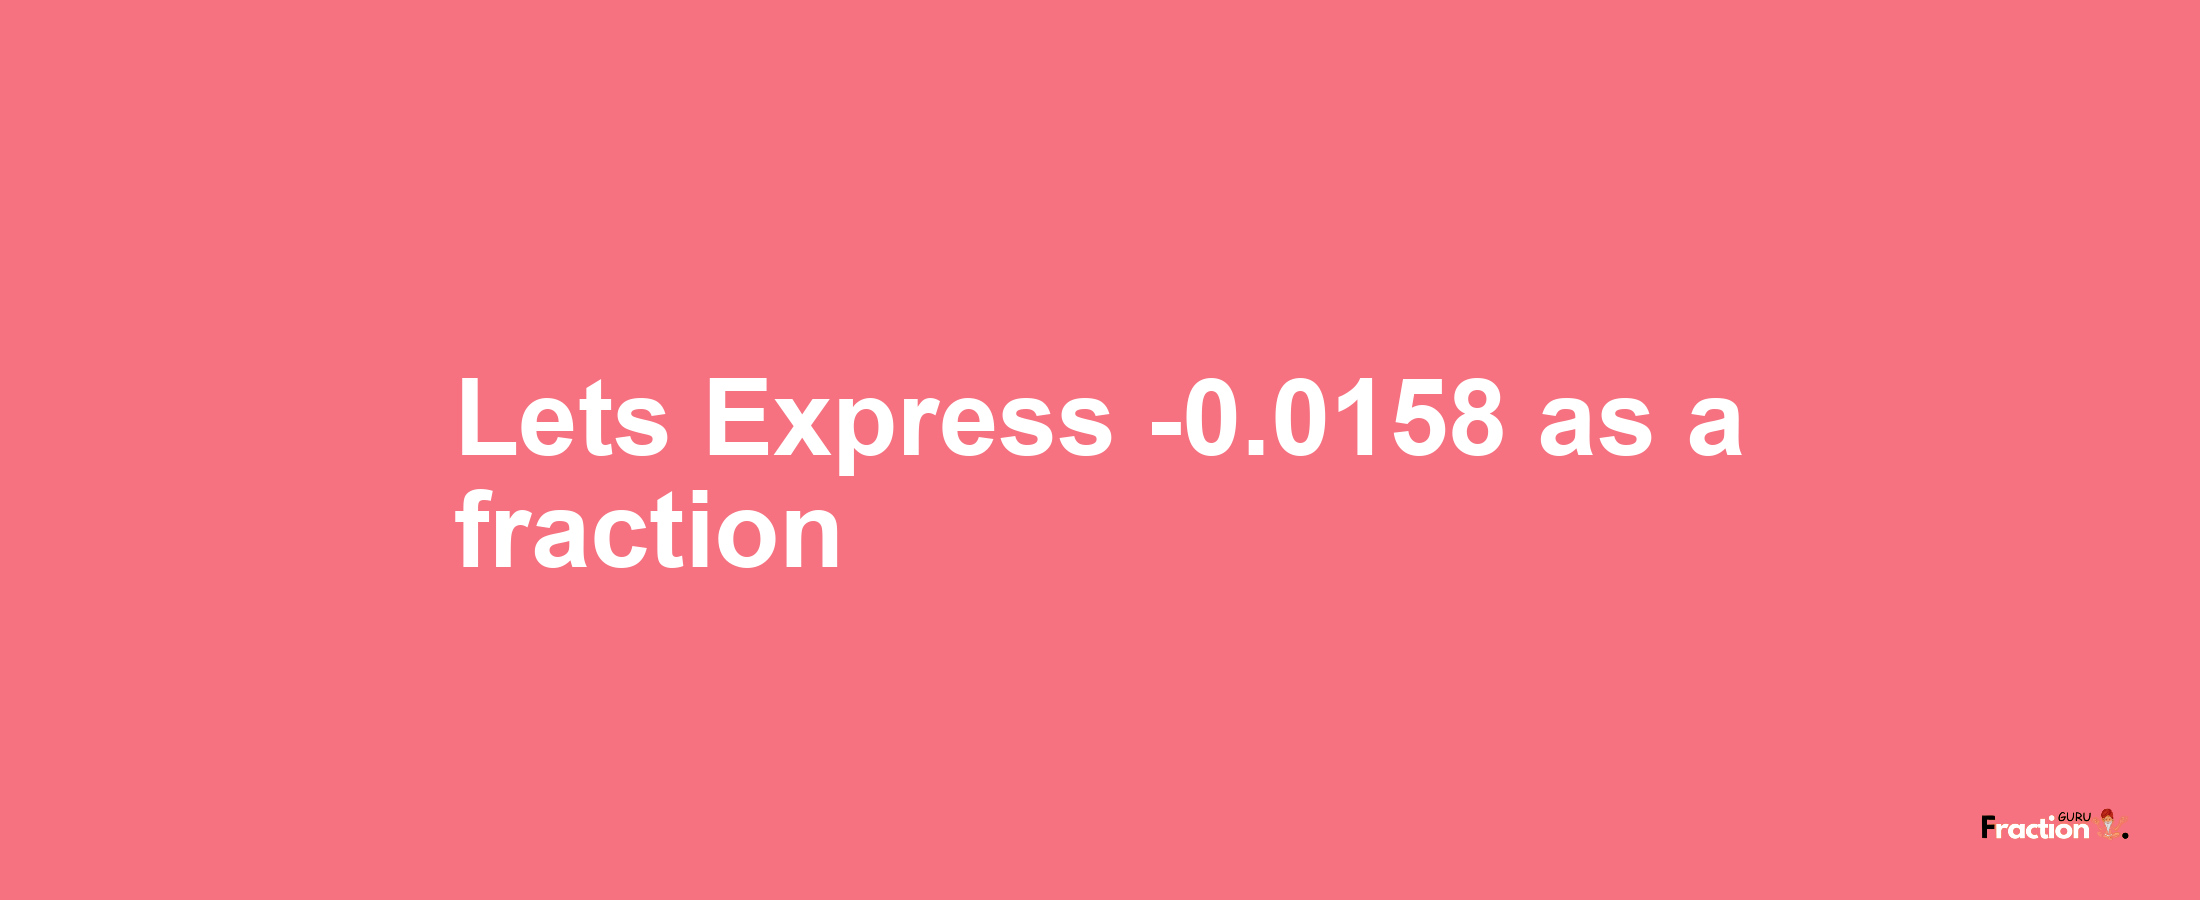 Lets Express -0.0158 as afraction